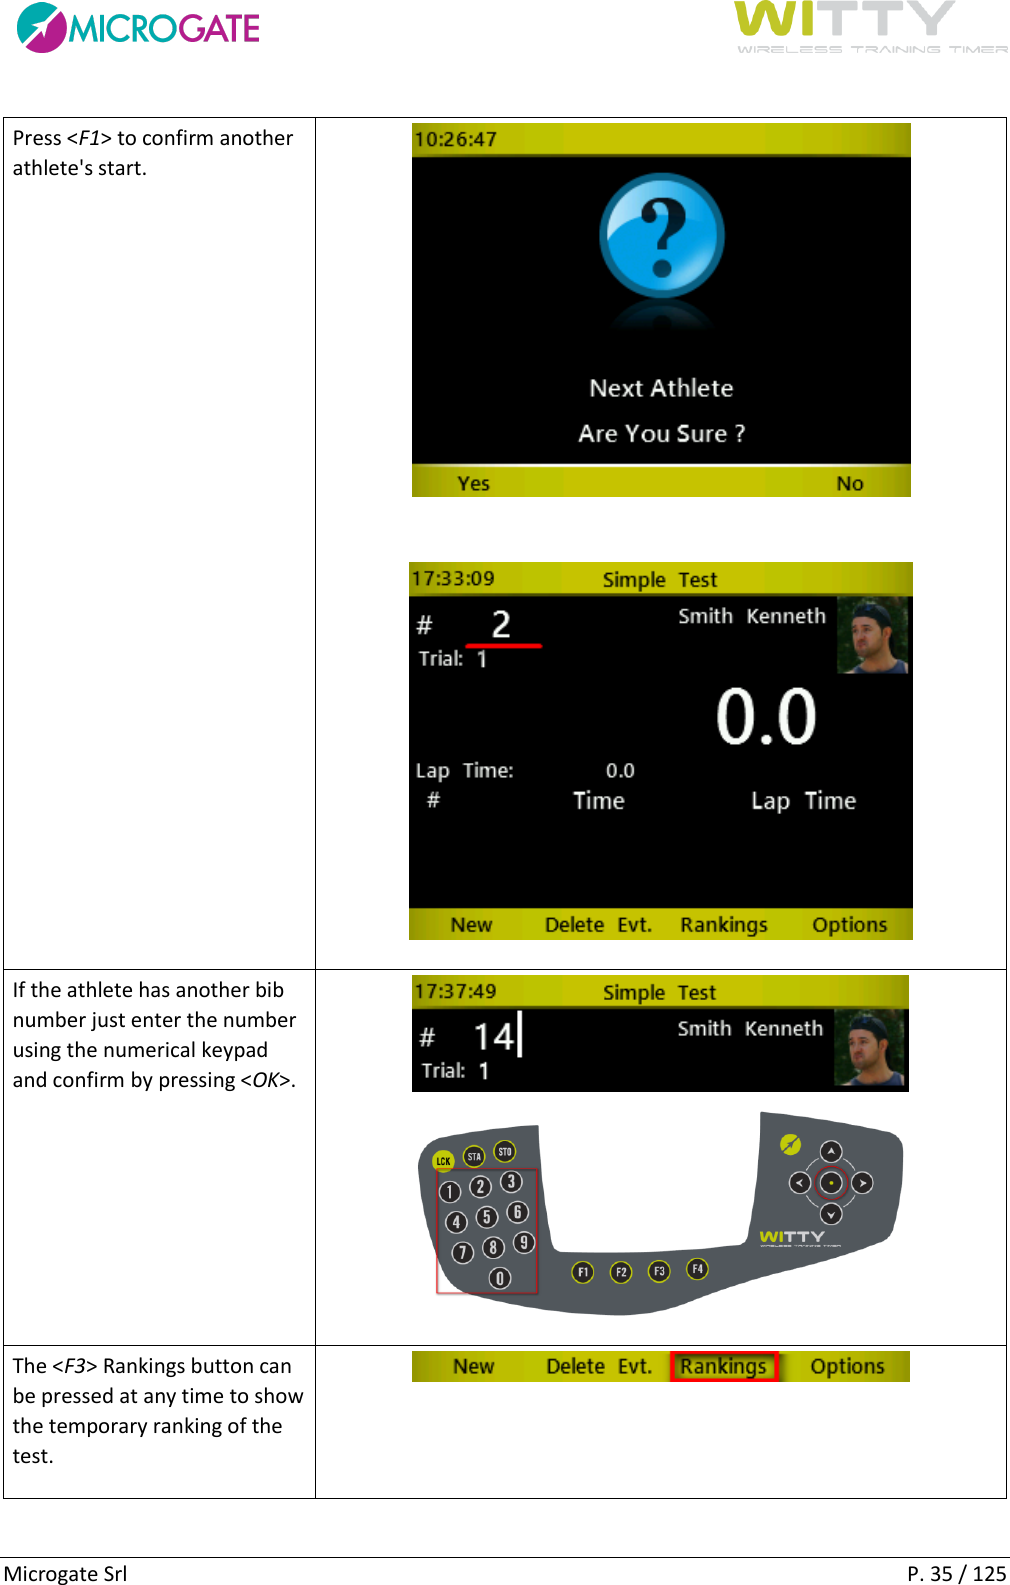      Microgate Srl    P. 35 / 125 Press &lt;F1&gt; to confirm another athlete&apos;s start.    If the athlete has another bib number just enter the number using the numerical keypad and confirm by pressing &lt;OK&gt;.   The &lt;F3&gt; Rankings button can be pressed at any time to show the temporary ranking of the test.   